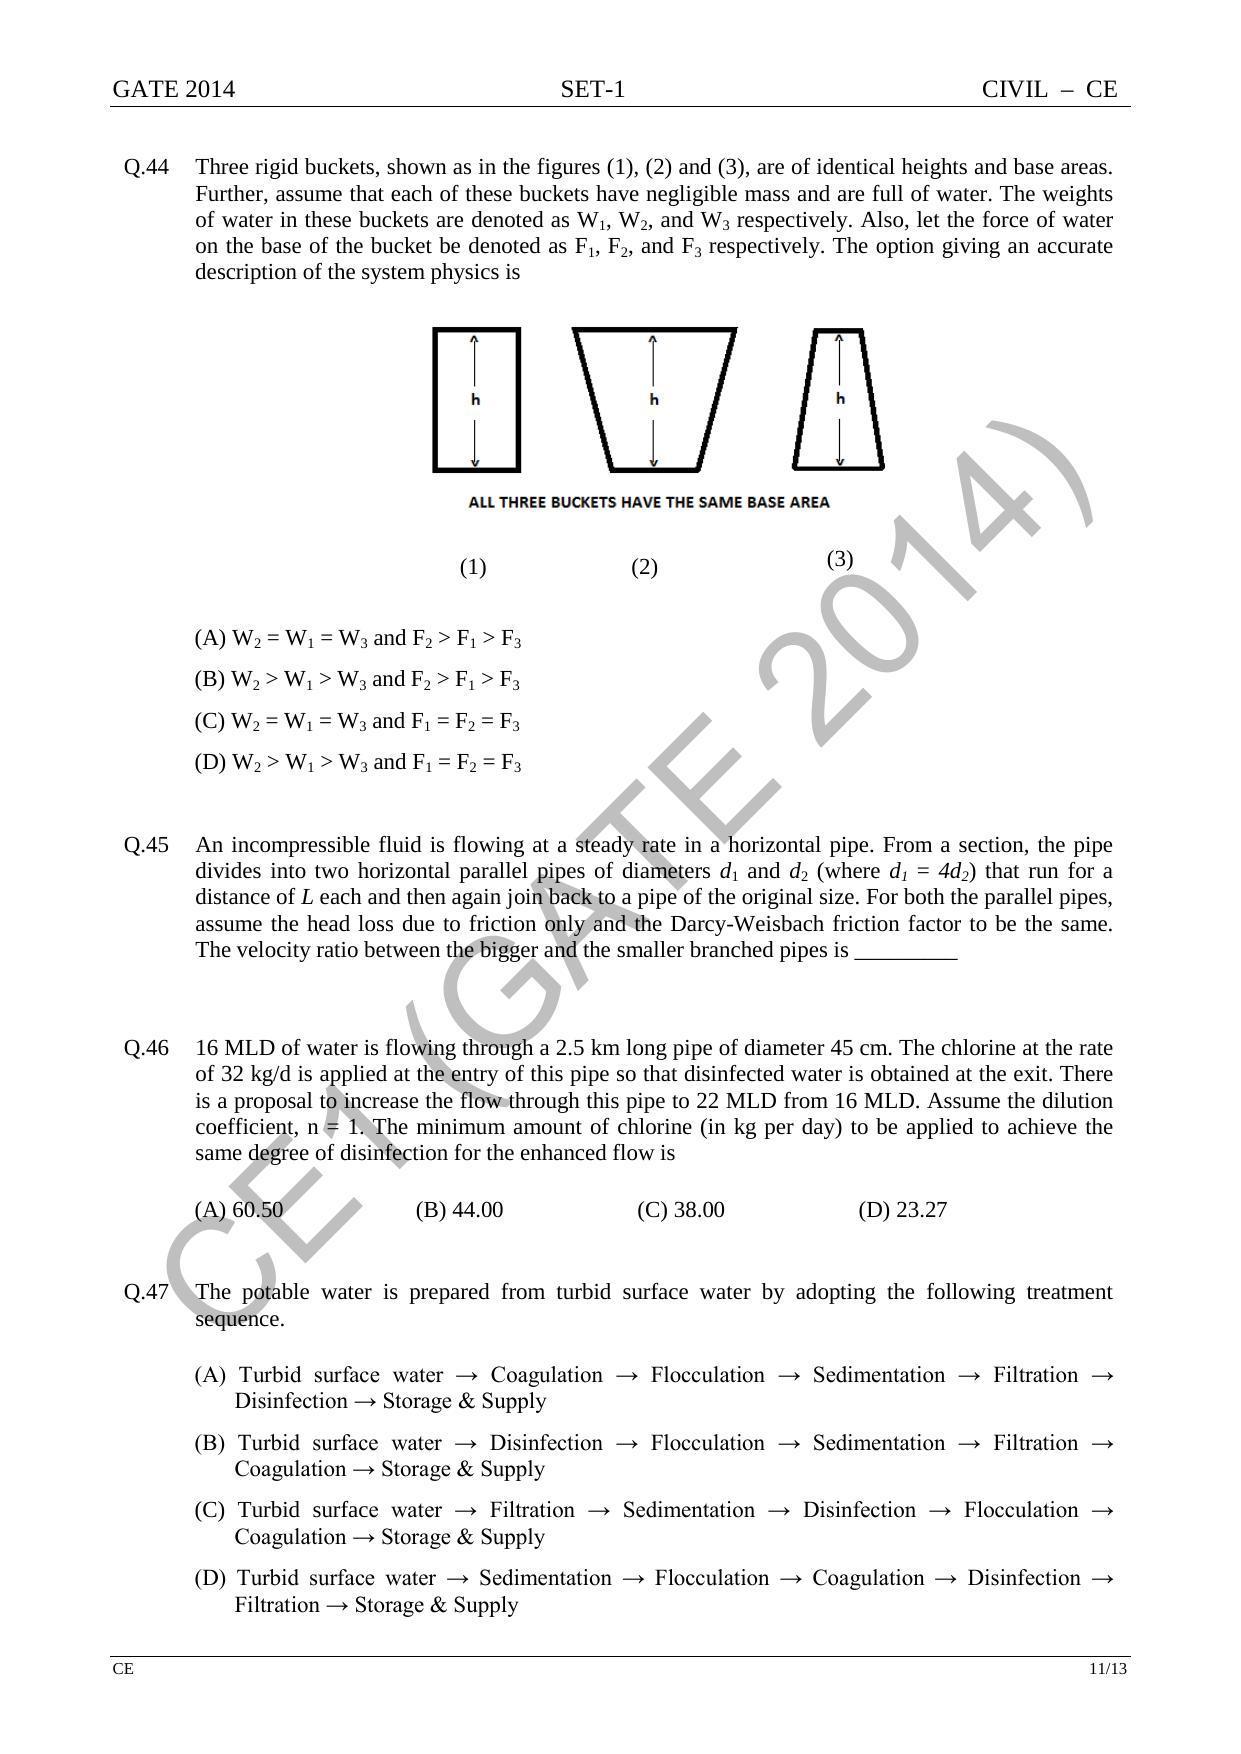 GATE 2014 Civil Engineering (CE) Question Paper with Answer Key - Page 18